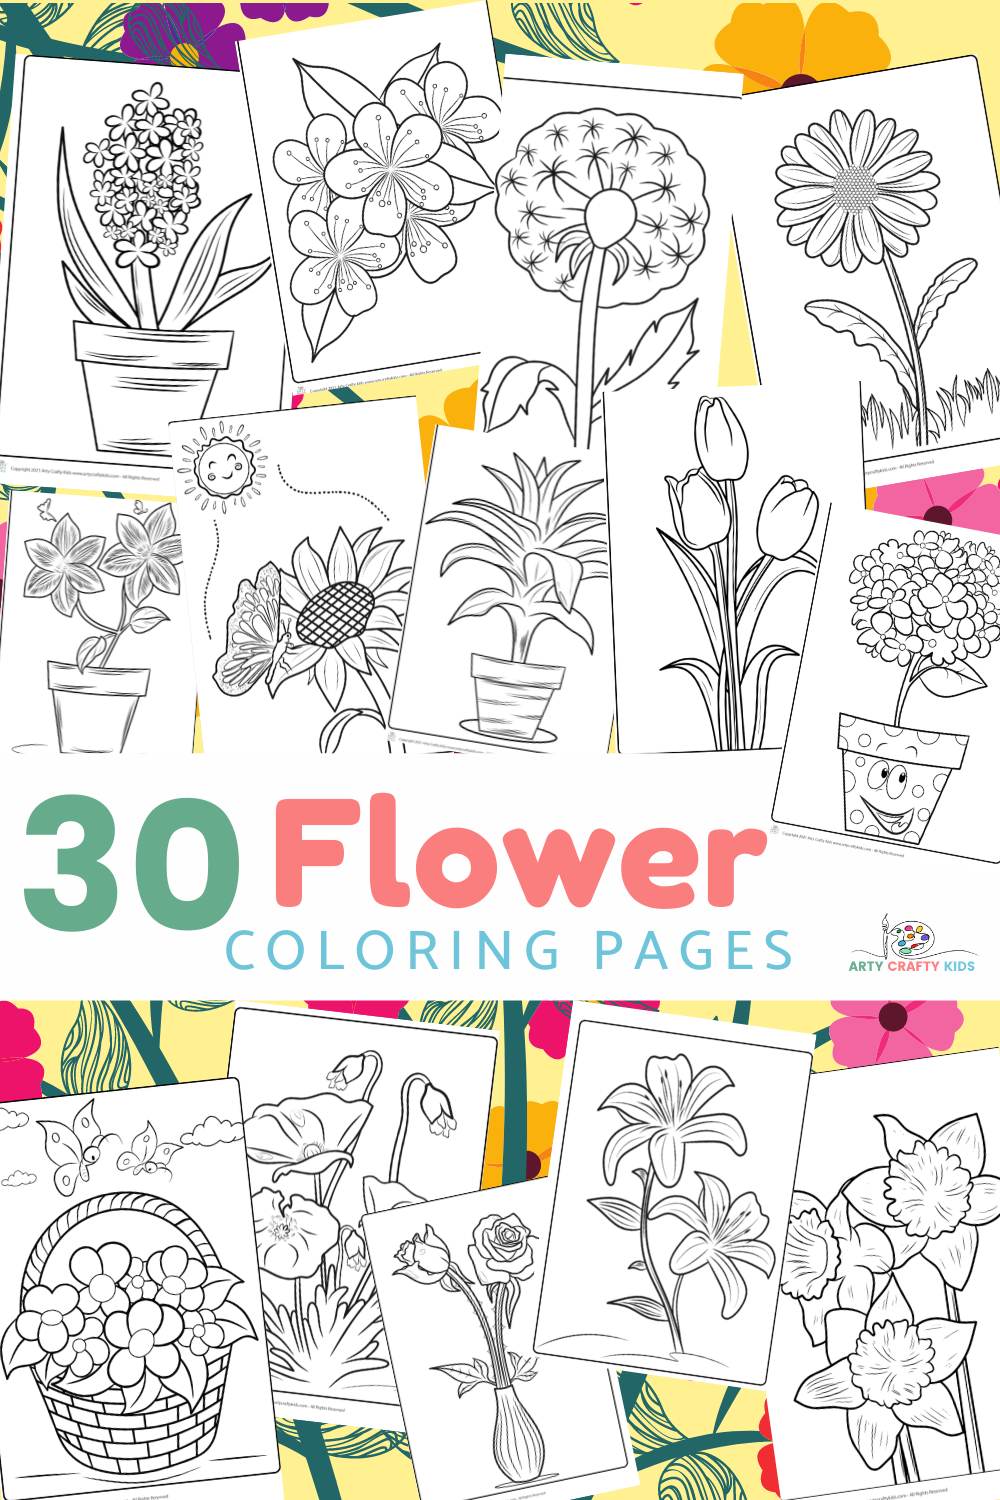 Flower Coloring Pages - 30 Flower Coloring Sheets | Arty Crafty Kids